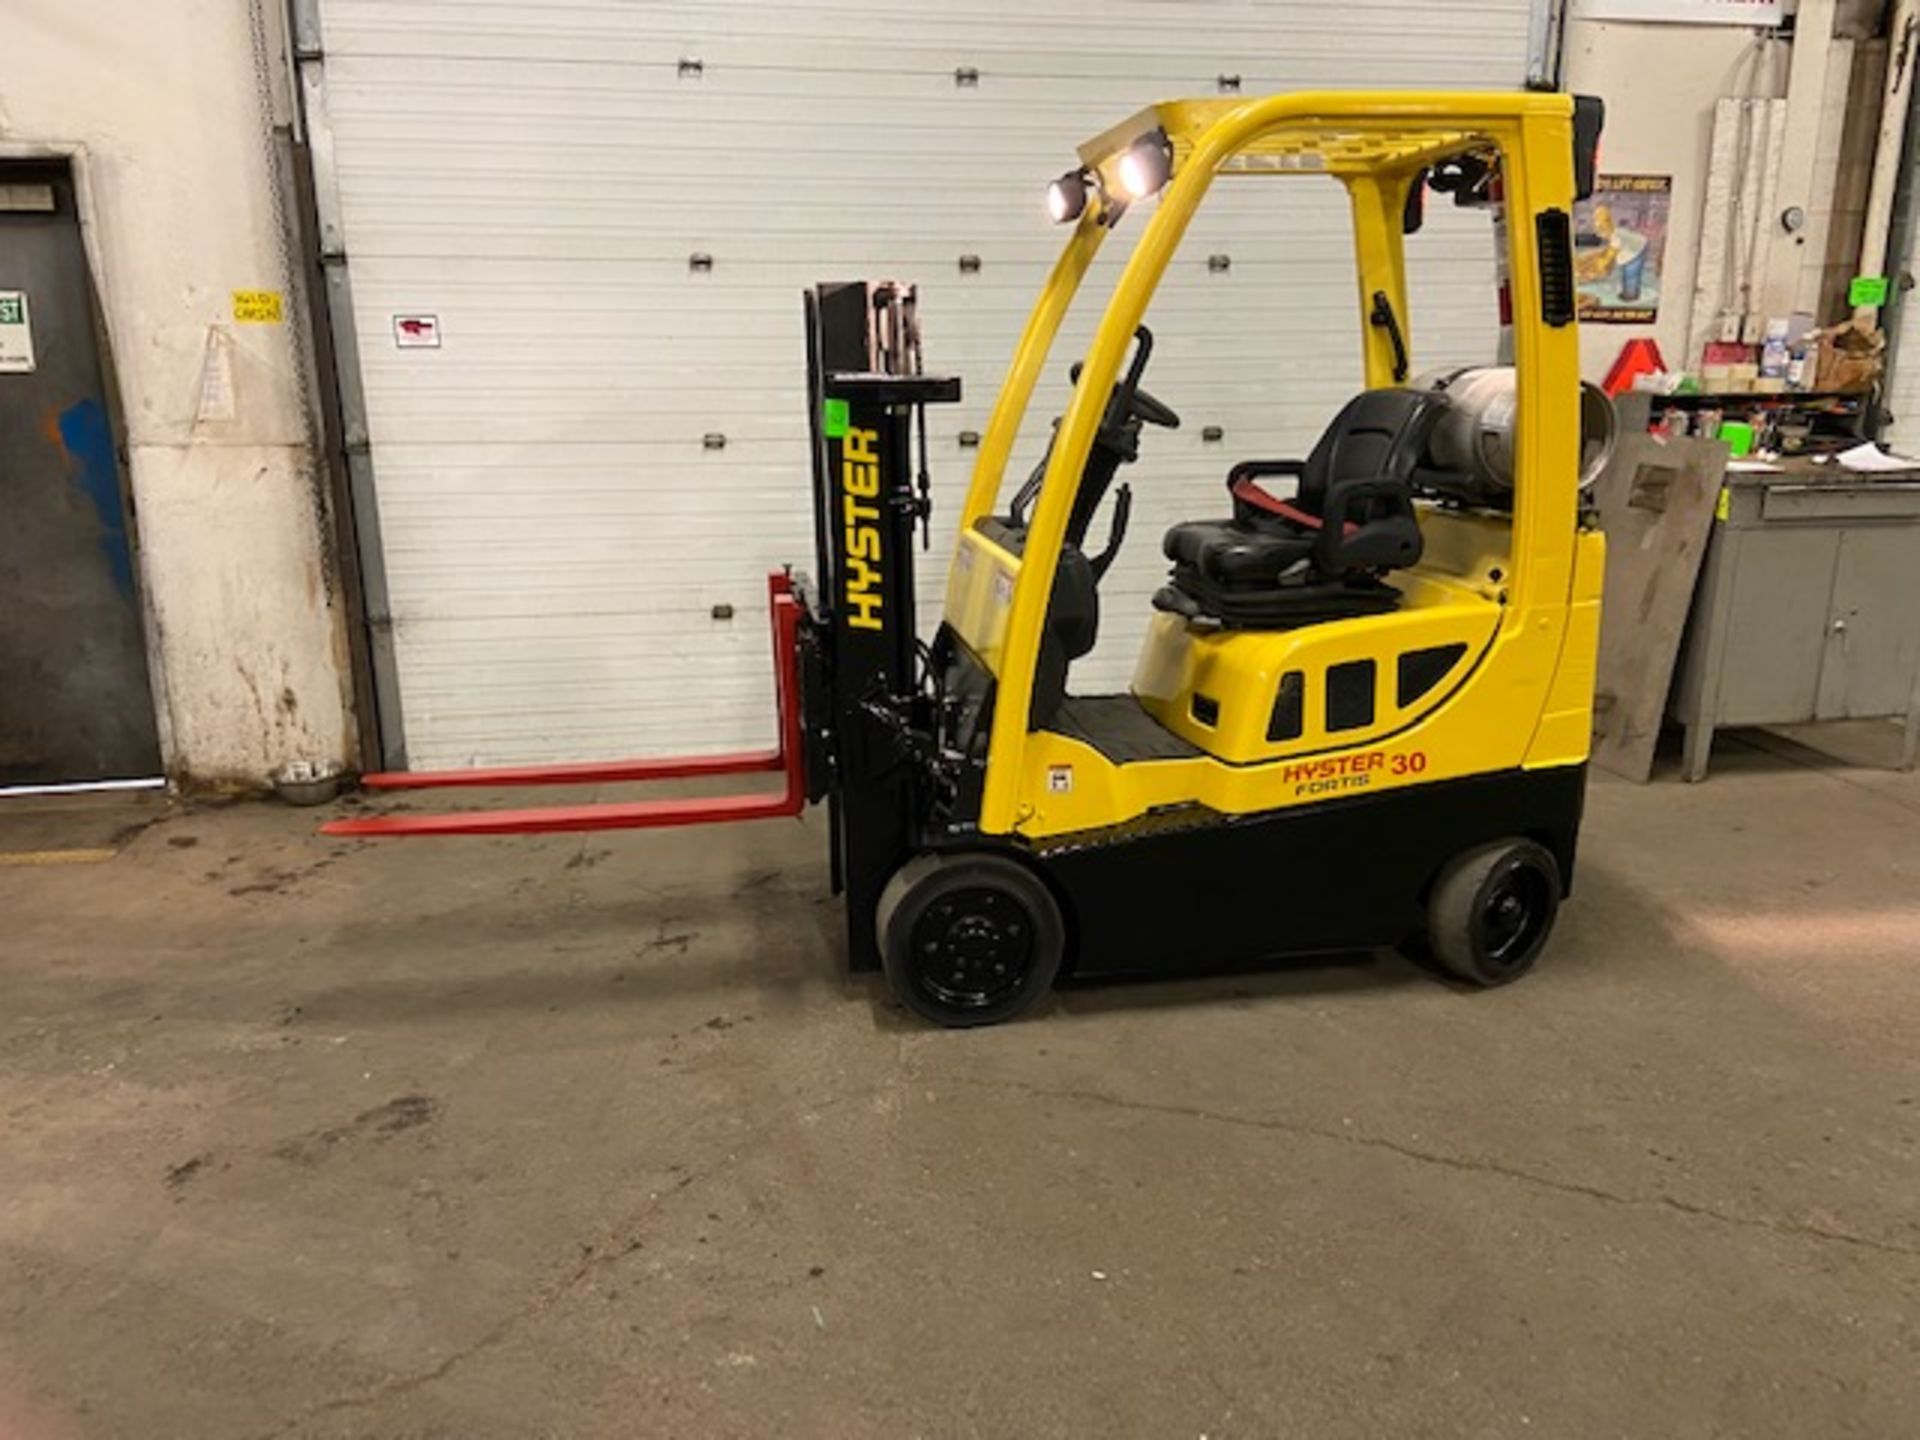 FREE CUSTOMS - 2015 Hyster 3000lbs Capacity Forklift LPG (propane) with sideshift LOW HOURS (no